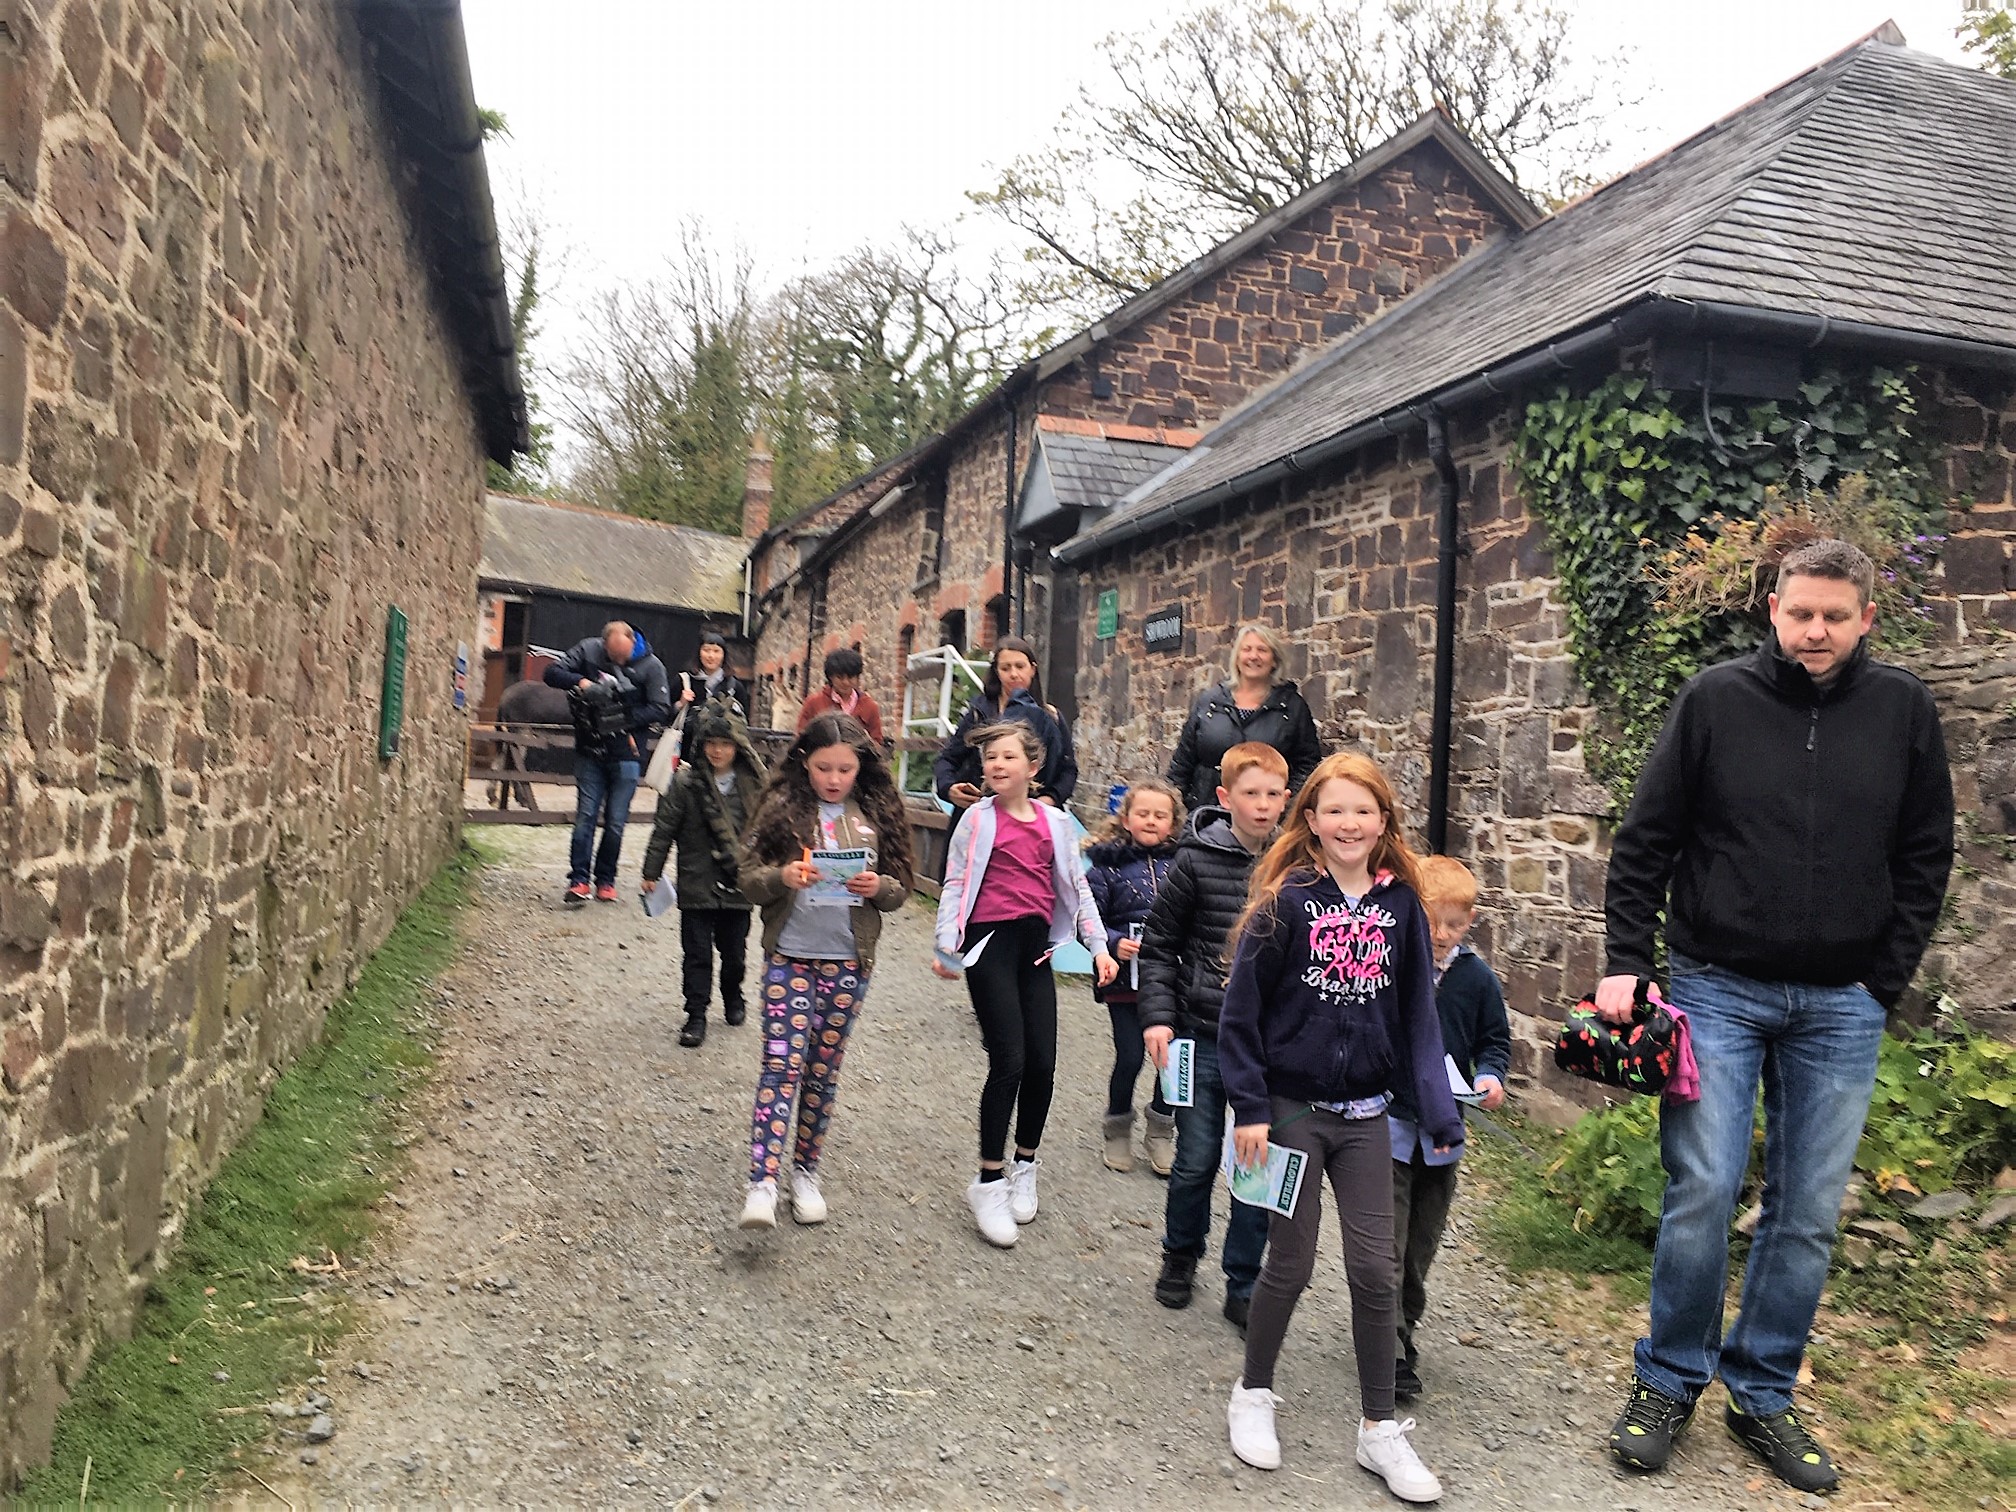 “8 of the best Devon family attractions Easter 2022”, Clovelly featured by Great British Life